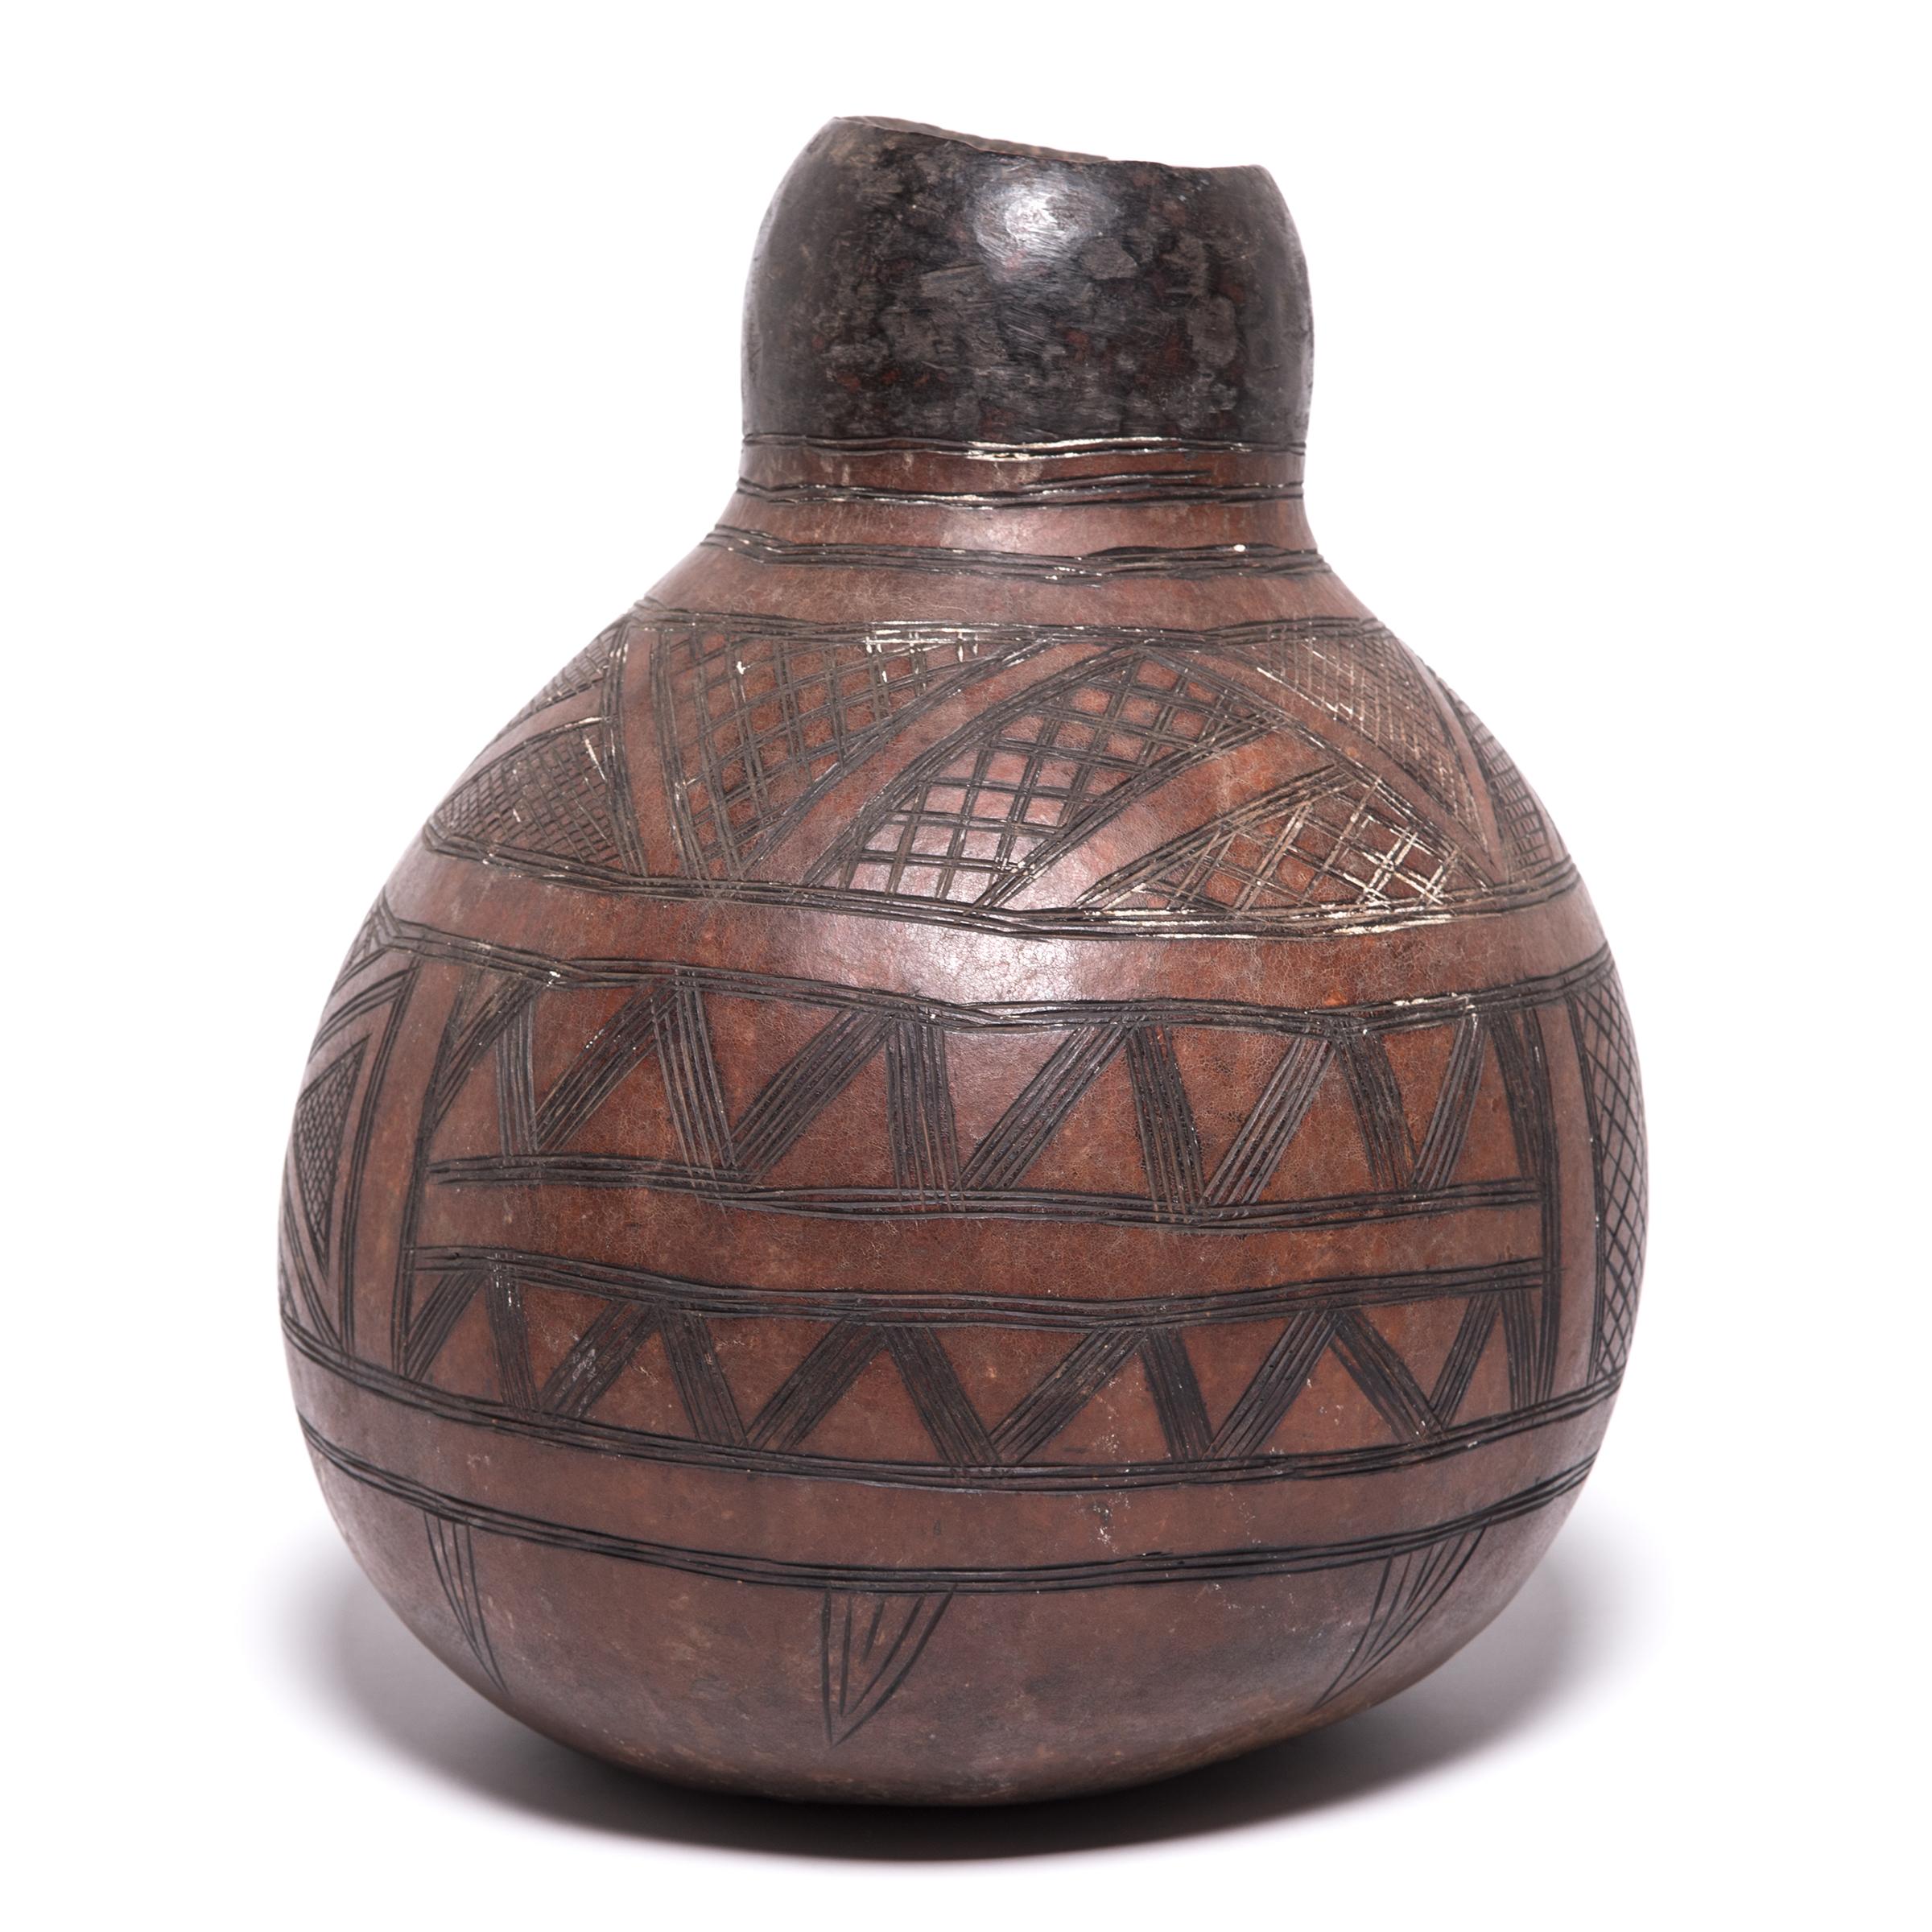 Nupe women were well-known for their skill in shaping drinking vessels. Everyday objects, like this gourd water vessel, received detailed attention. Made of a dried-out gourd, the vessel's varied textures come from its functional design. The